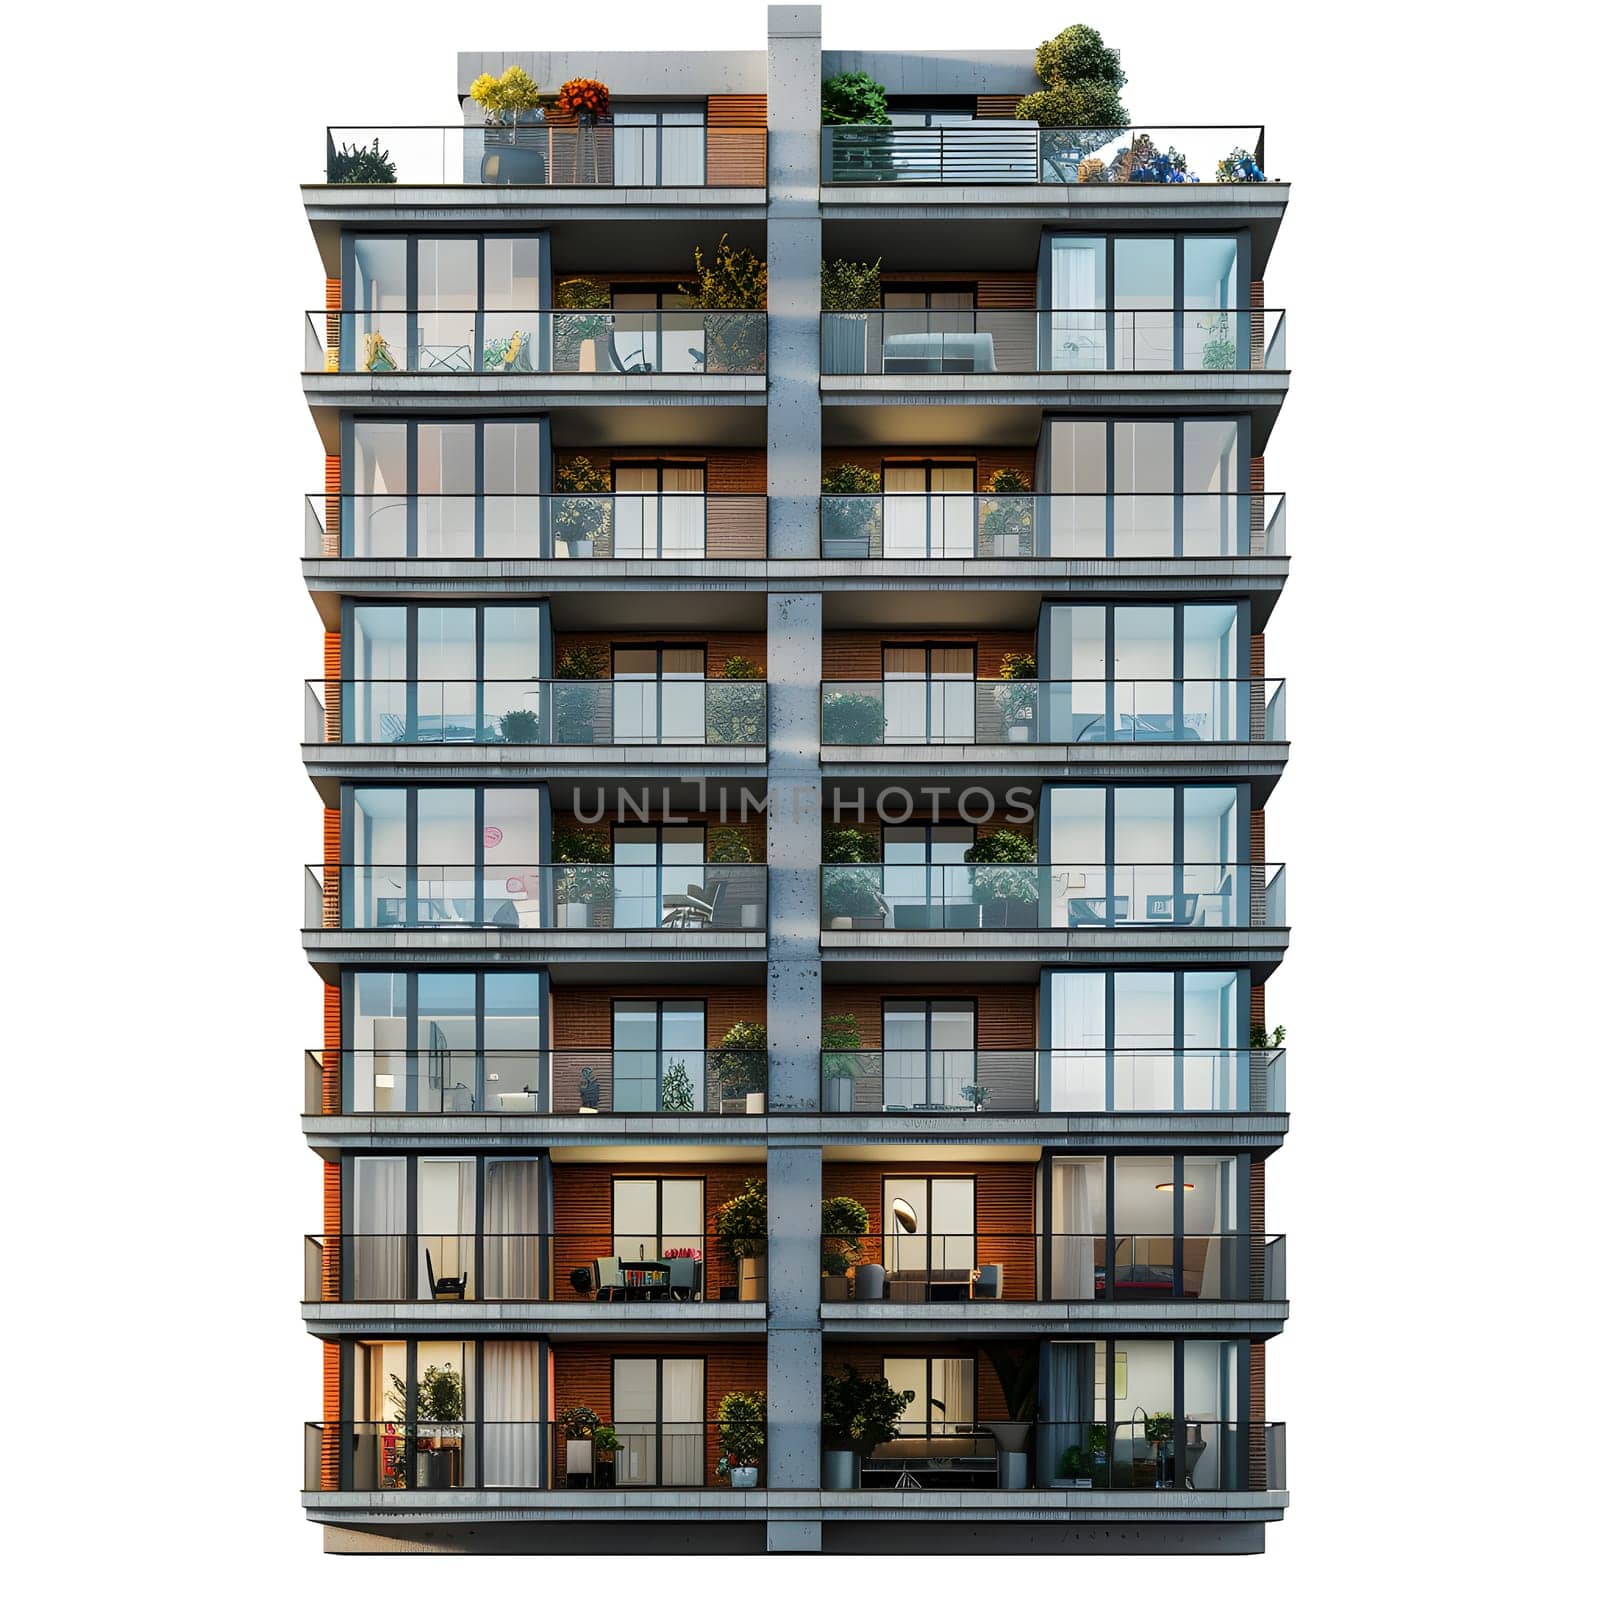 A urban design masterpiece, the rectangular tower block features a facade adorned with a beautiful pattern of windows and balconies, resembling an artful font in a sea of condominiums